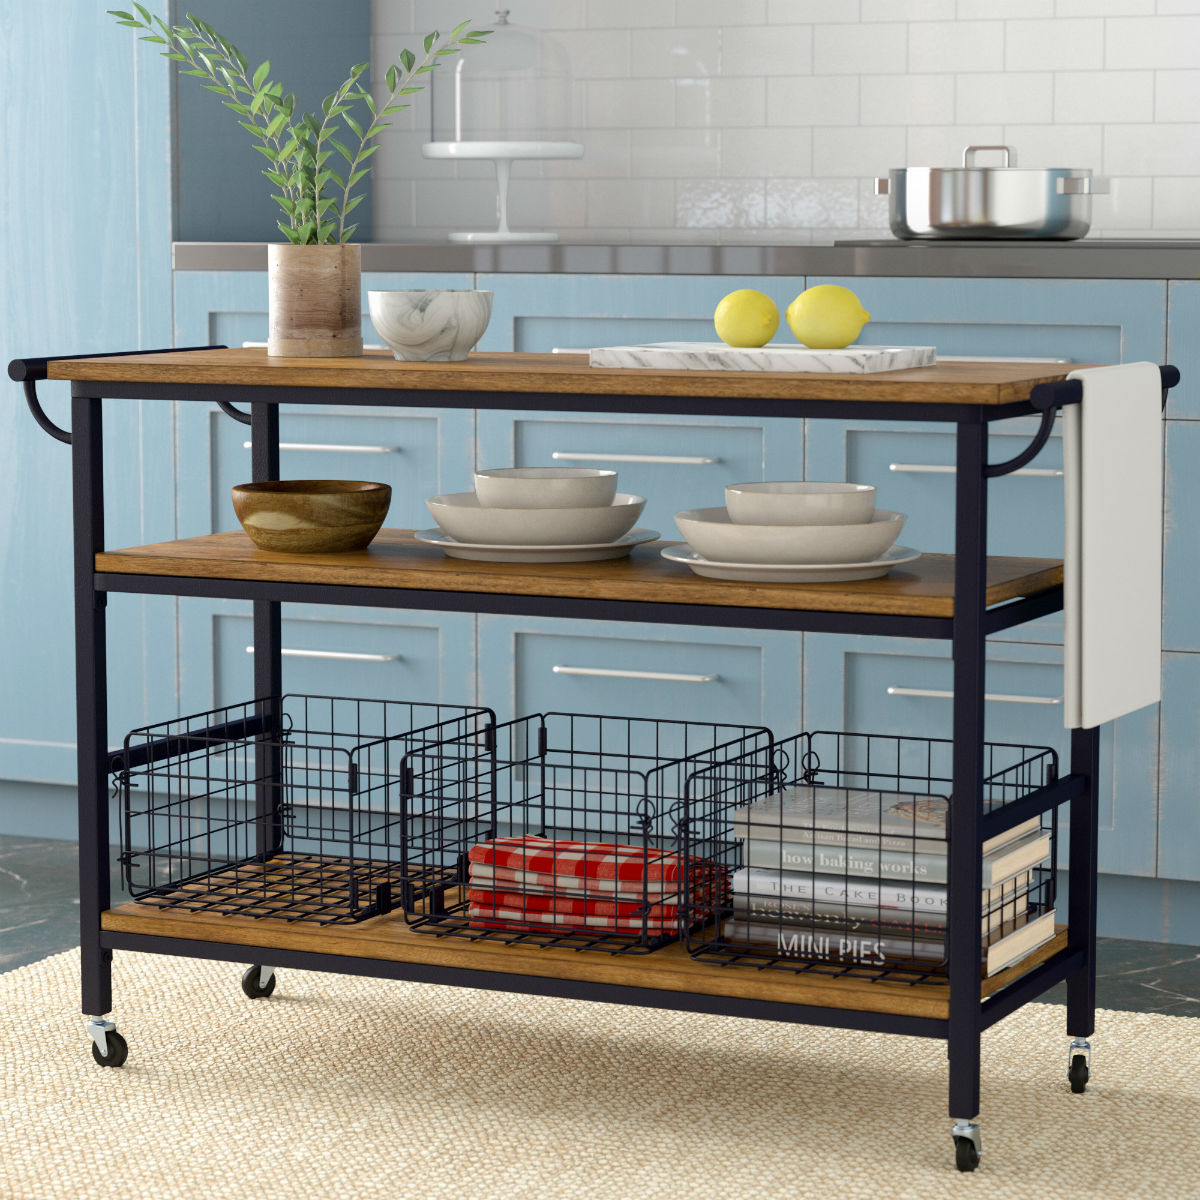 The Best Kitchen Island Size for Wheeled Options